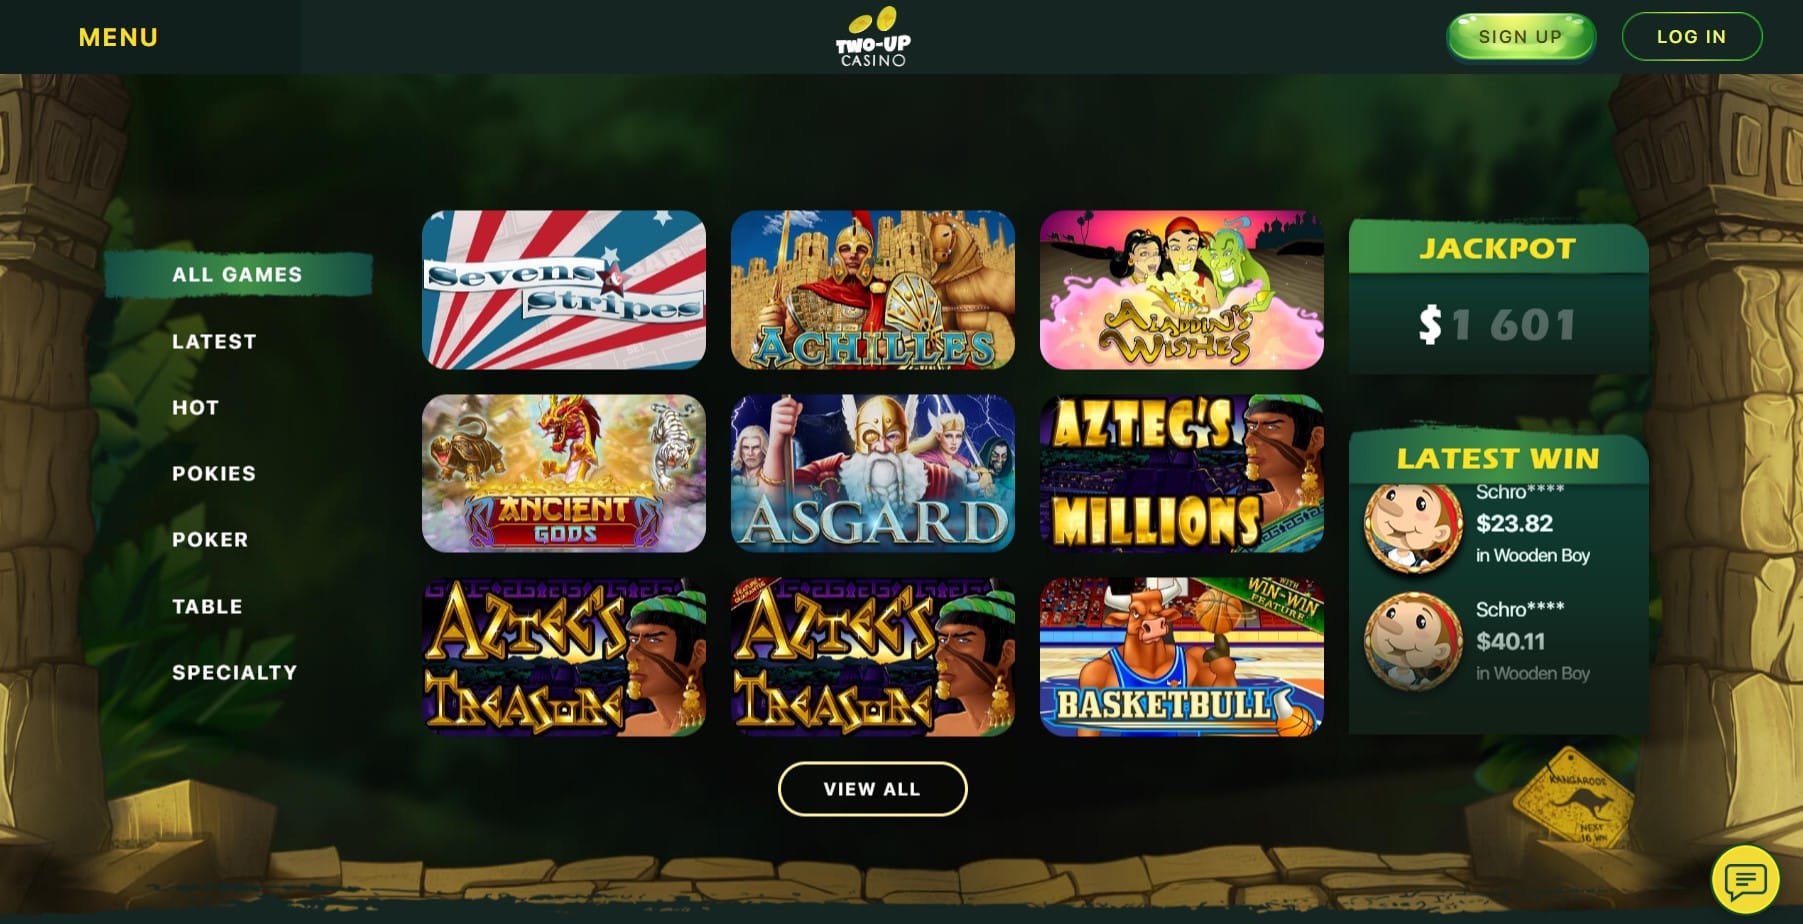 Two Up Casino games